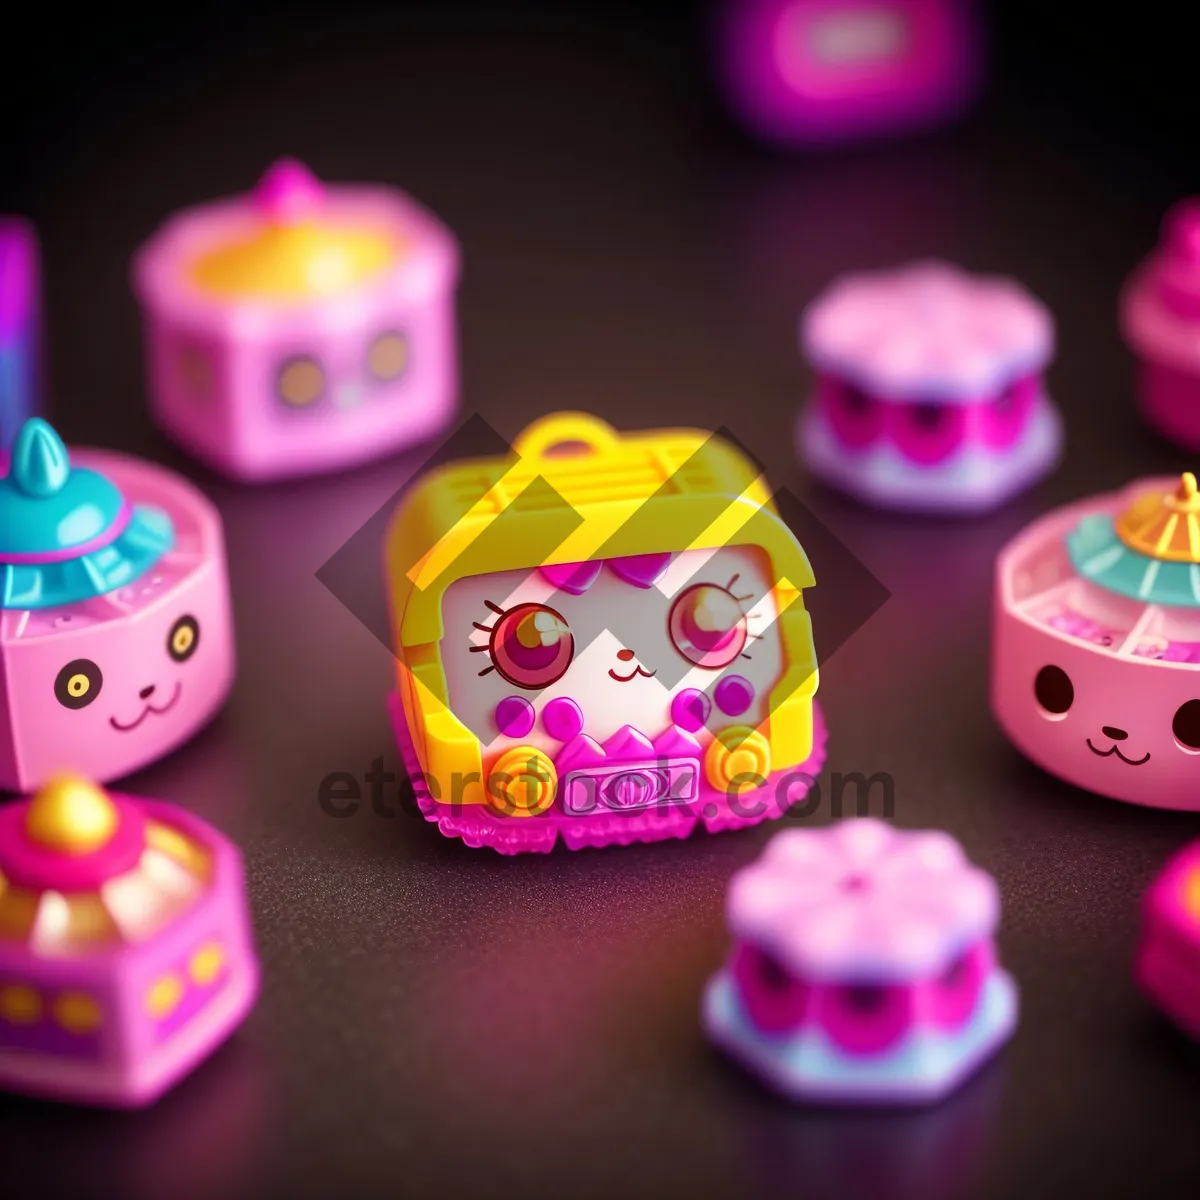 Picture of Colorful Jelly Piggy Bank Toy Design.